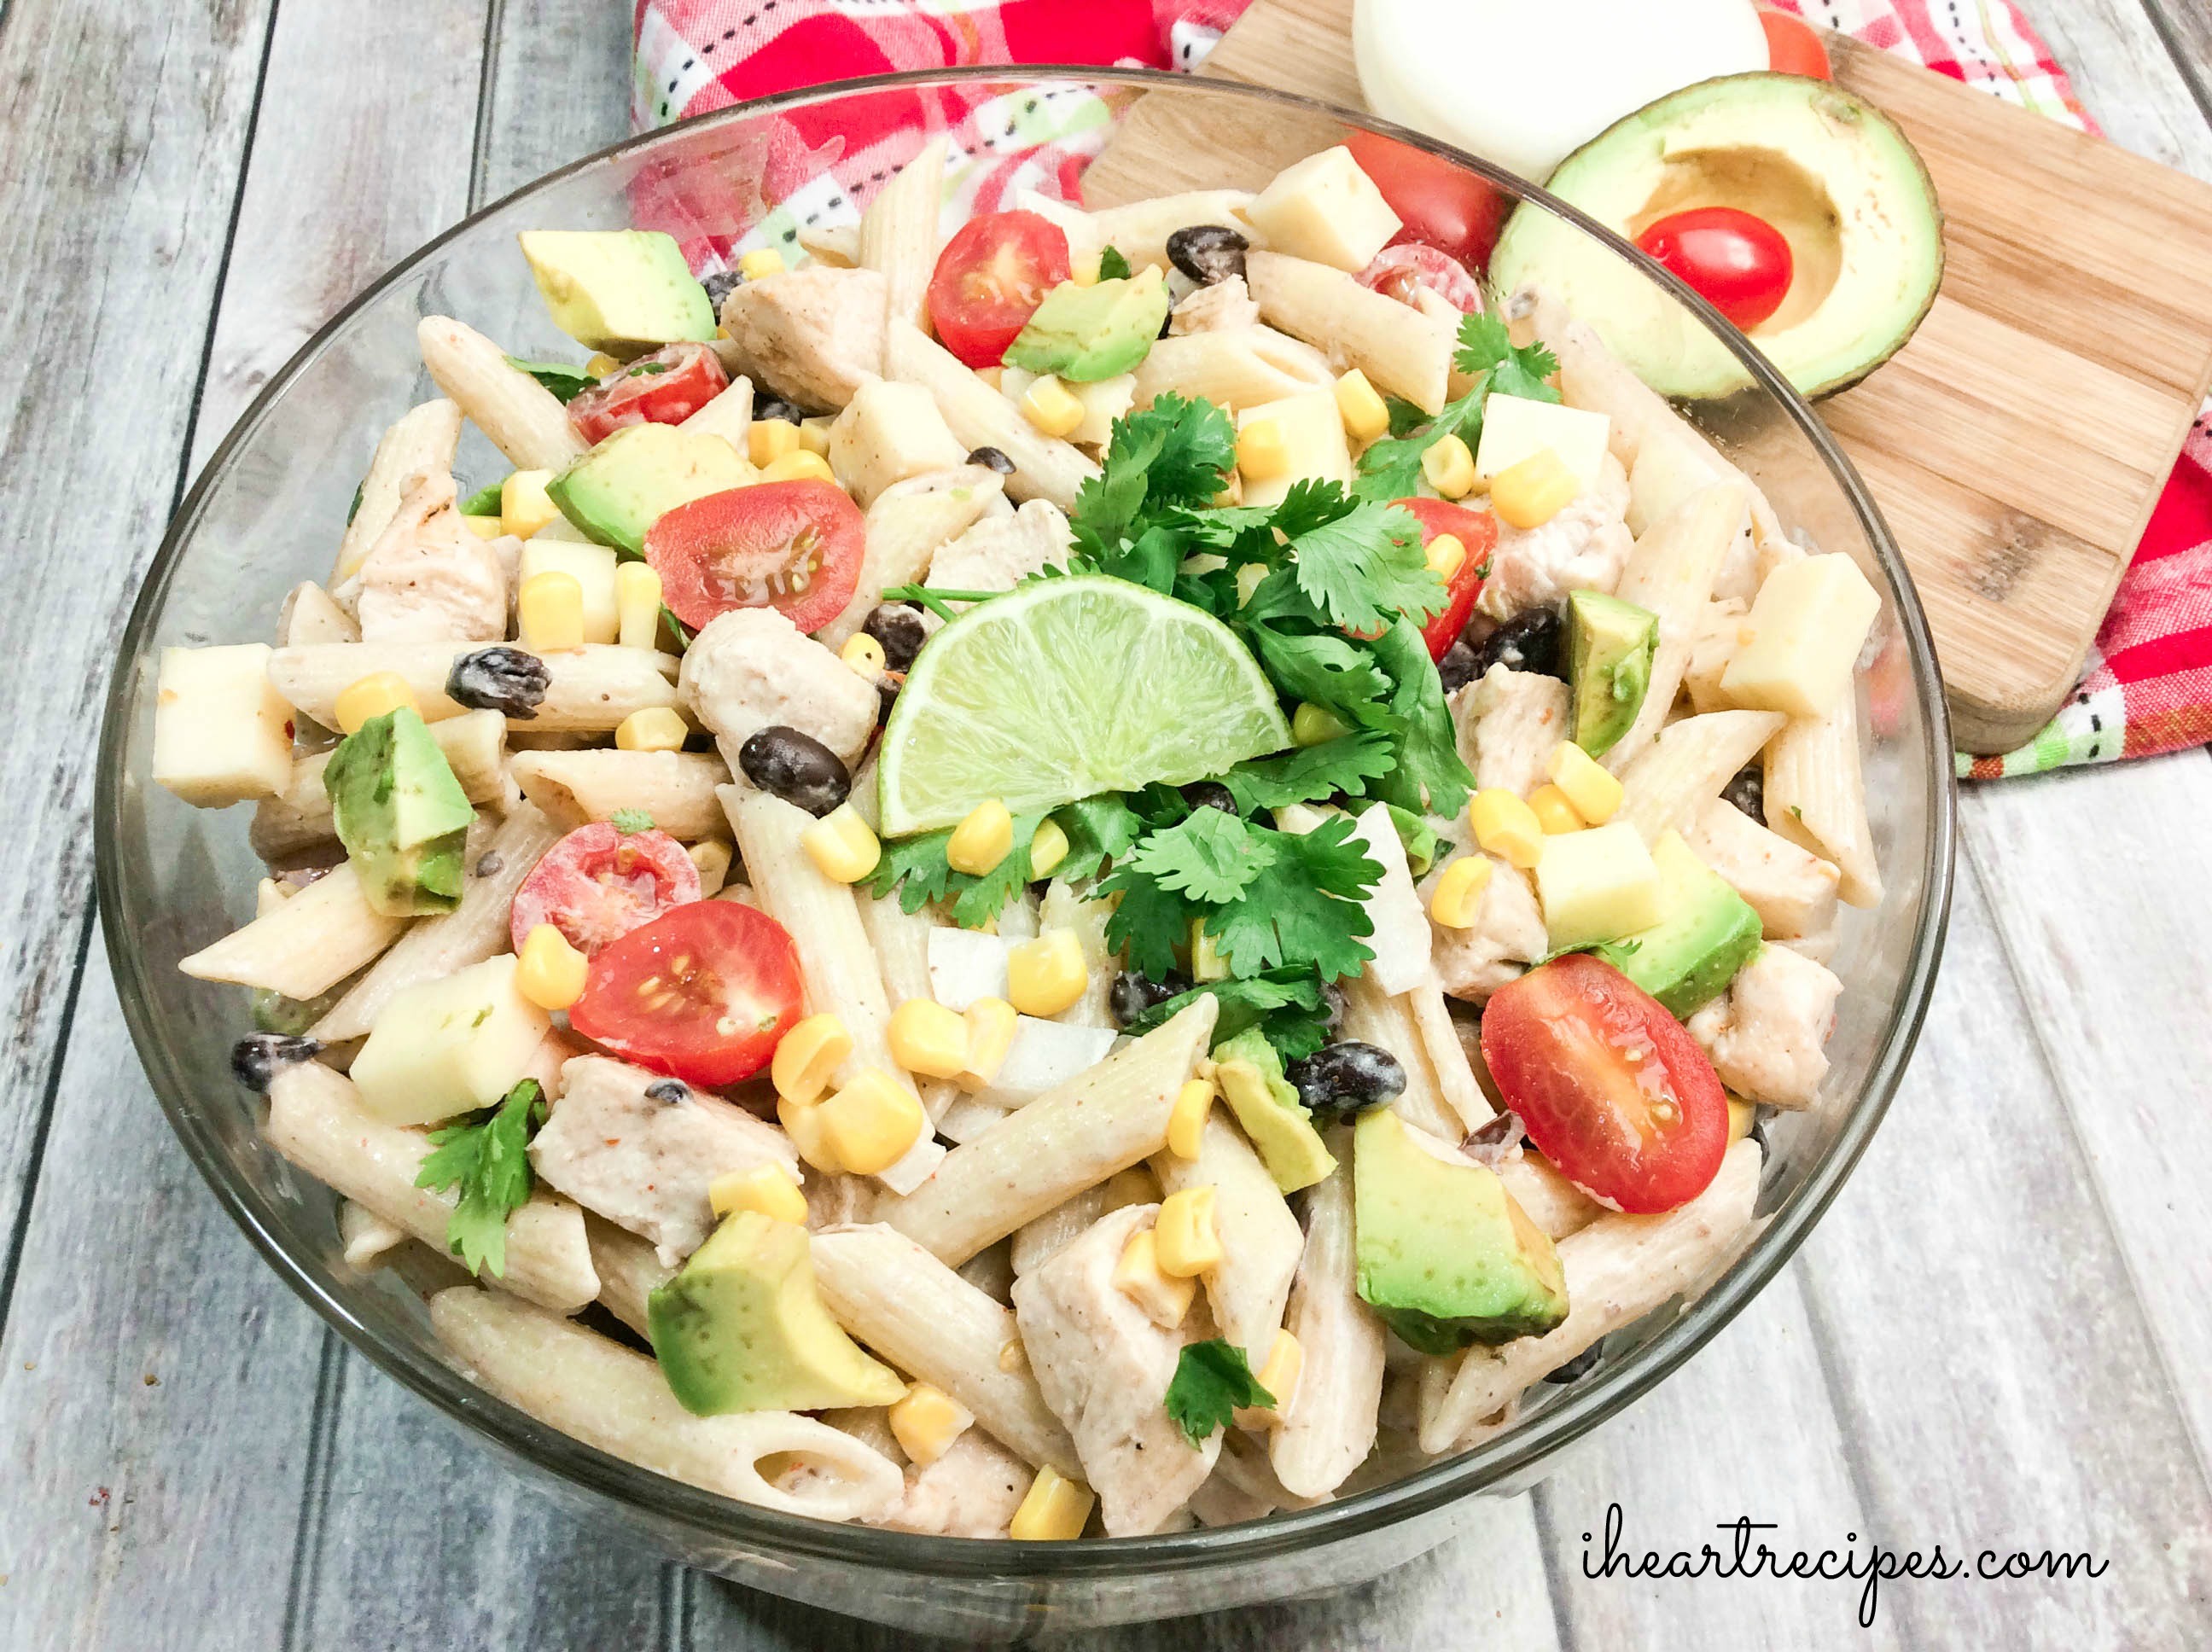 Creamy Cilantro Ranch Pasta Salad fills a classic glass serving bowl. This salad is bursting with color and flavor!